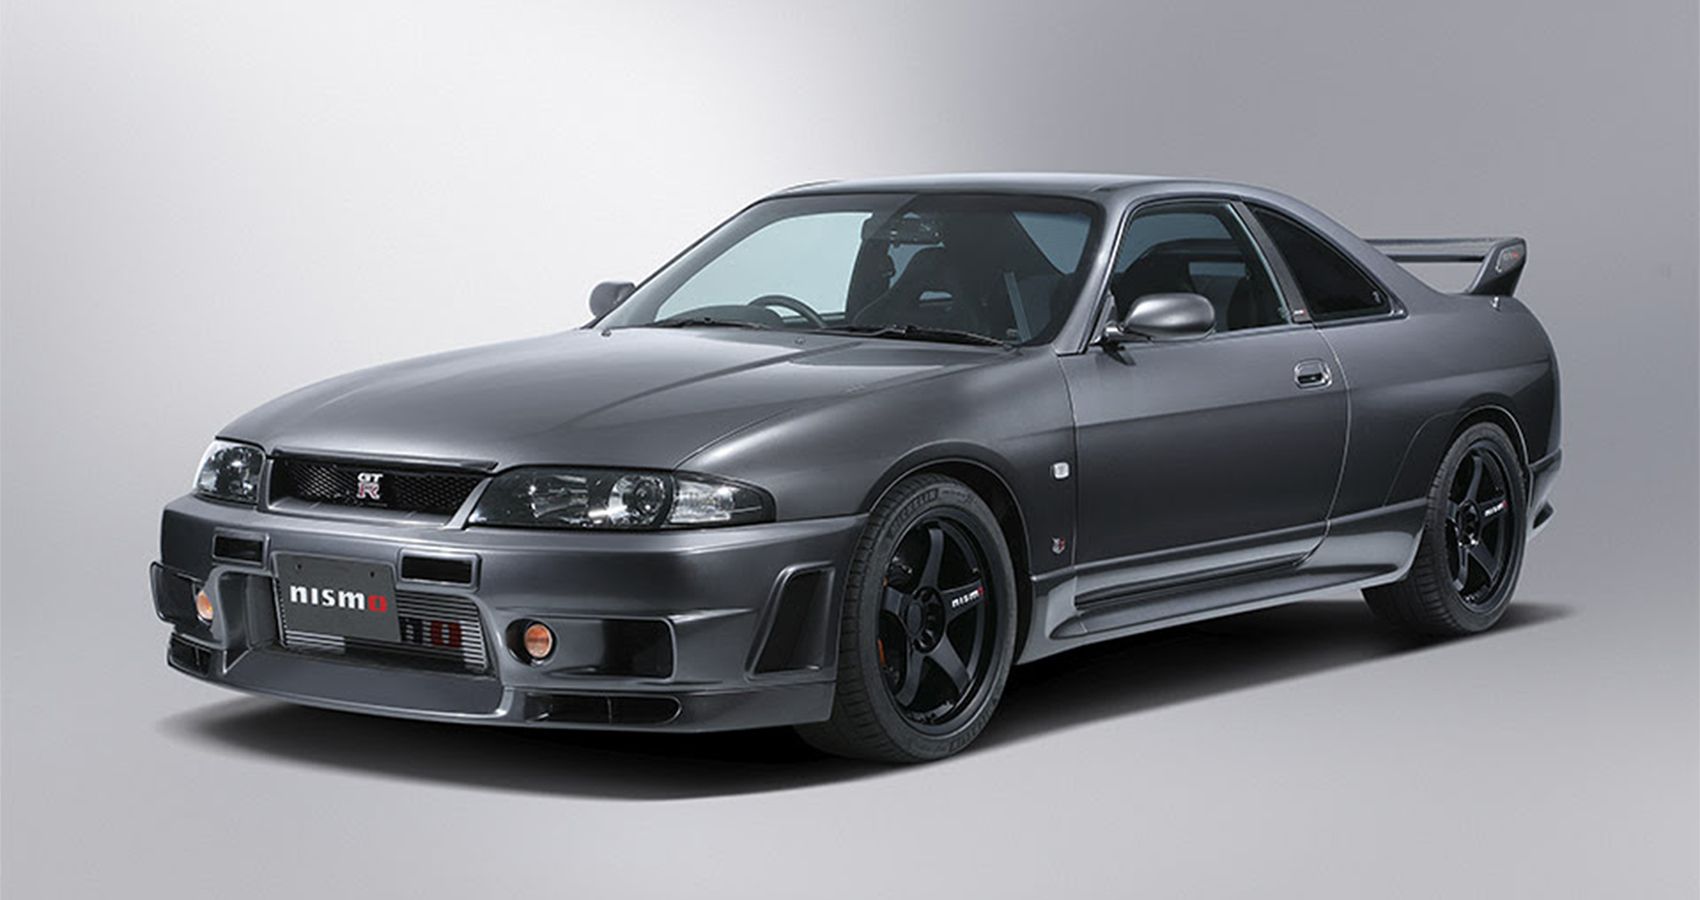 Why The R33 GT-R Is An Underappreciated JDM Of The Nissan Skyline Family